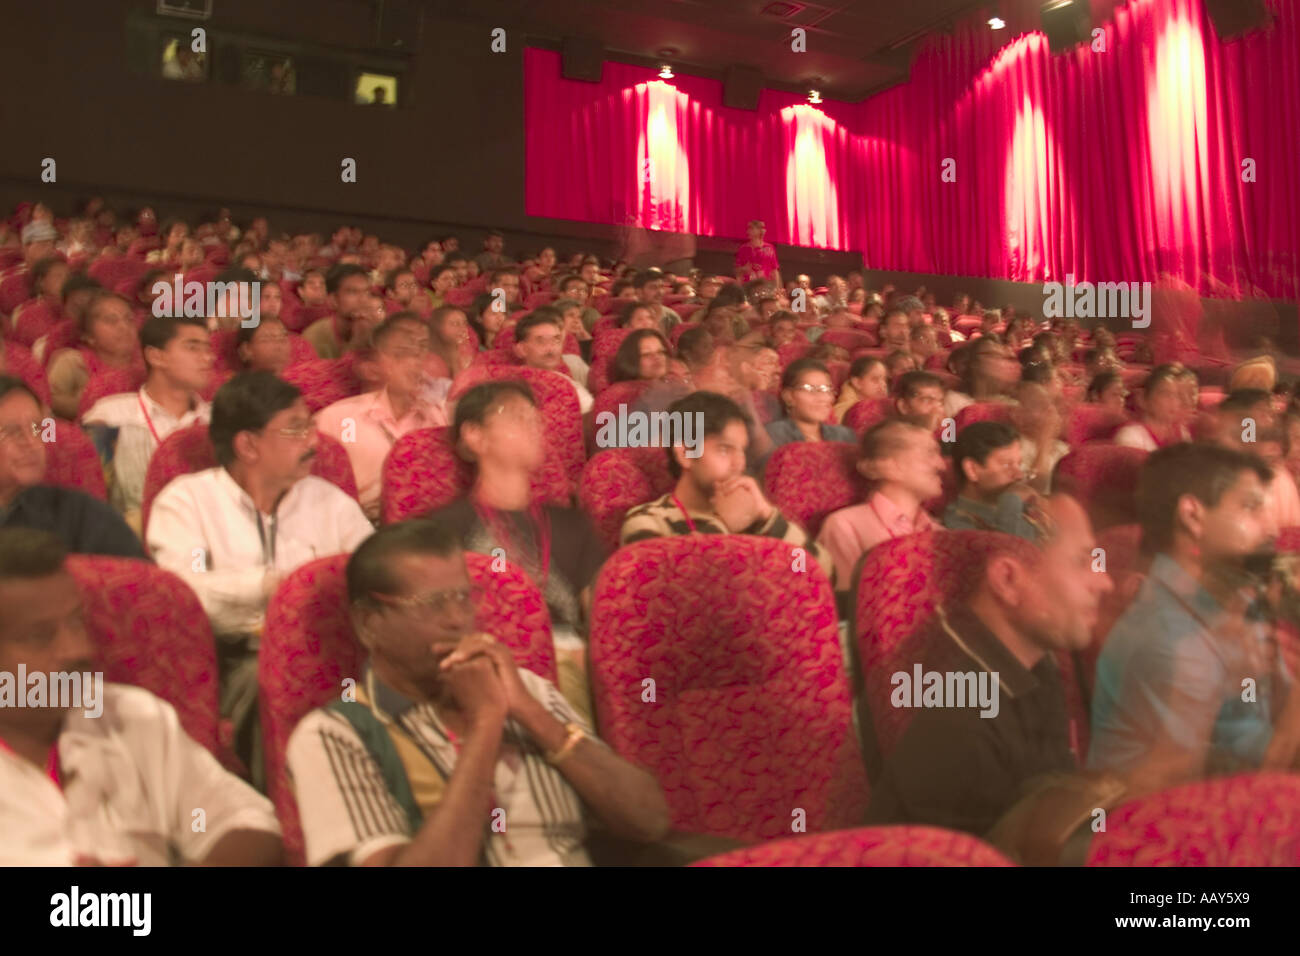 Movie hall red interior audience waiting for the screening of the film Goa India Stock Photo